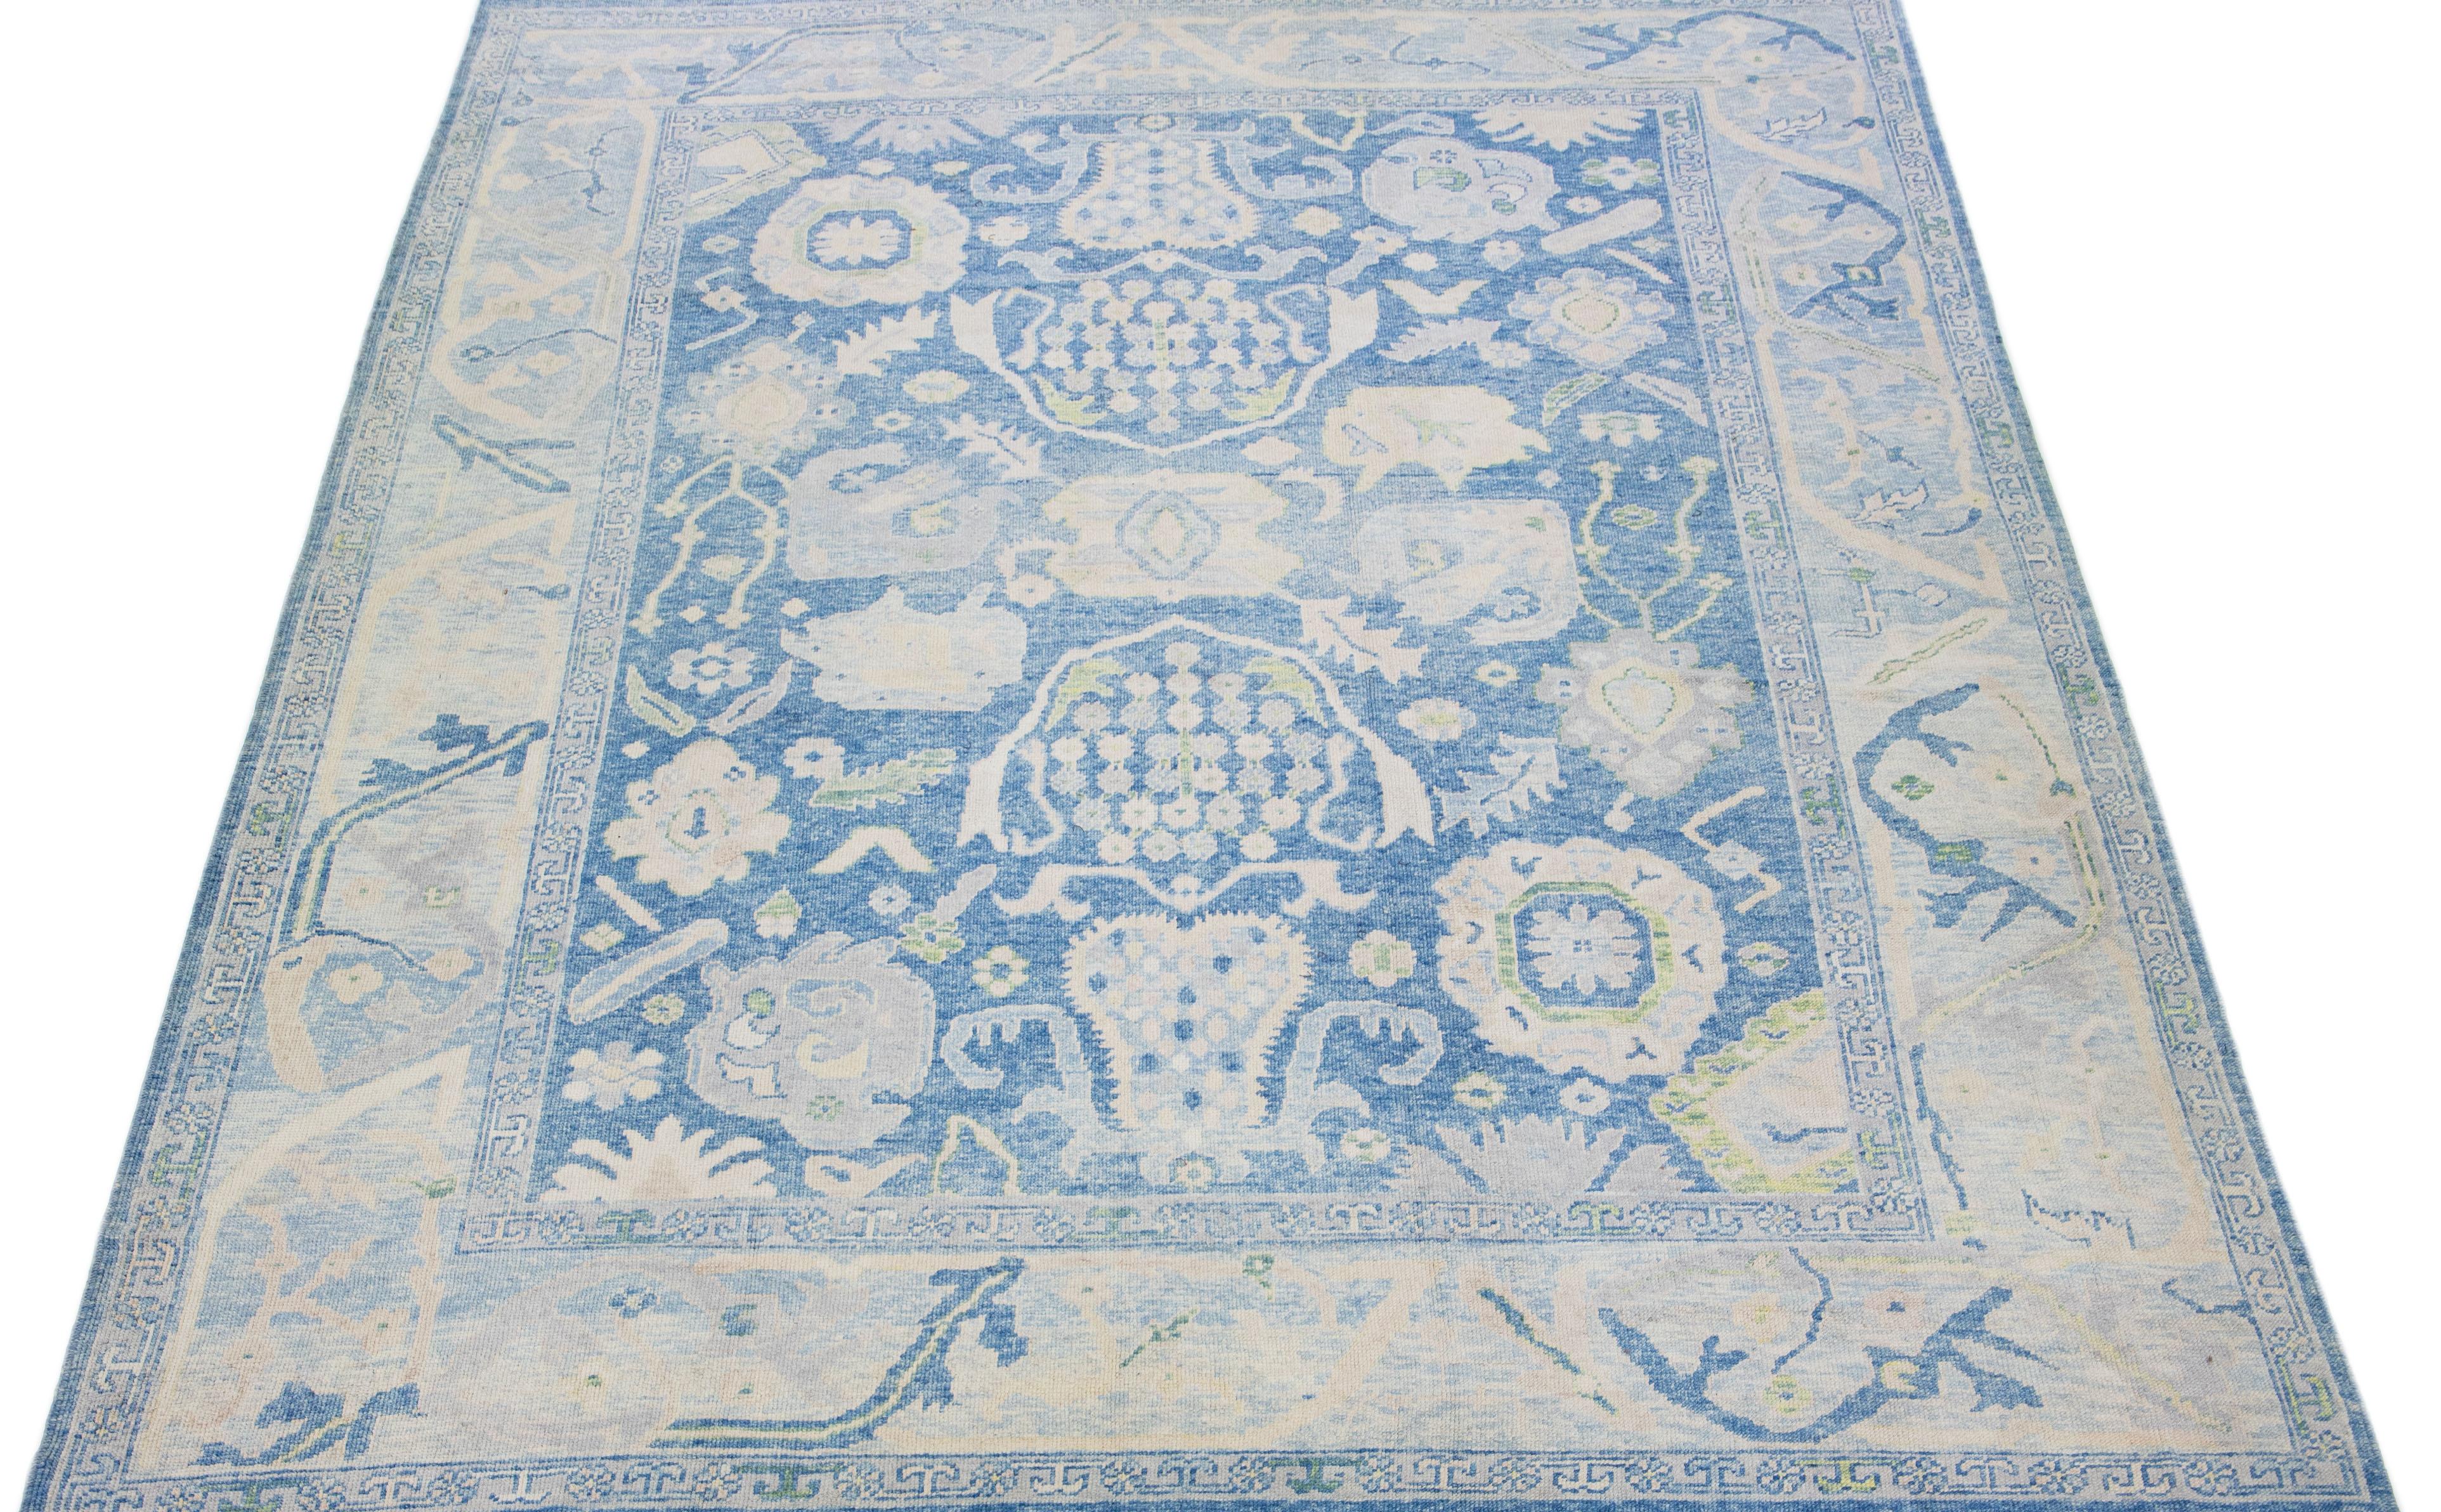 Beautiful modern Oushak hand-knotted wool rug with a blue color field. This Turkish Piece has beige, gray, and green accent colors in a gorgeous all-over floral design.

This rug measures: 10'5